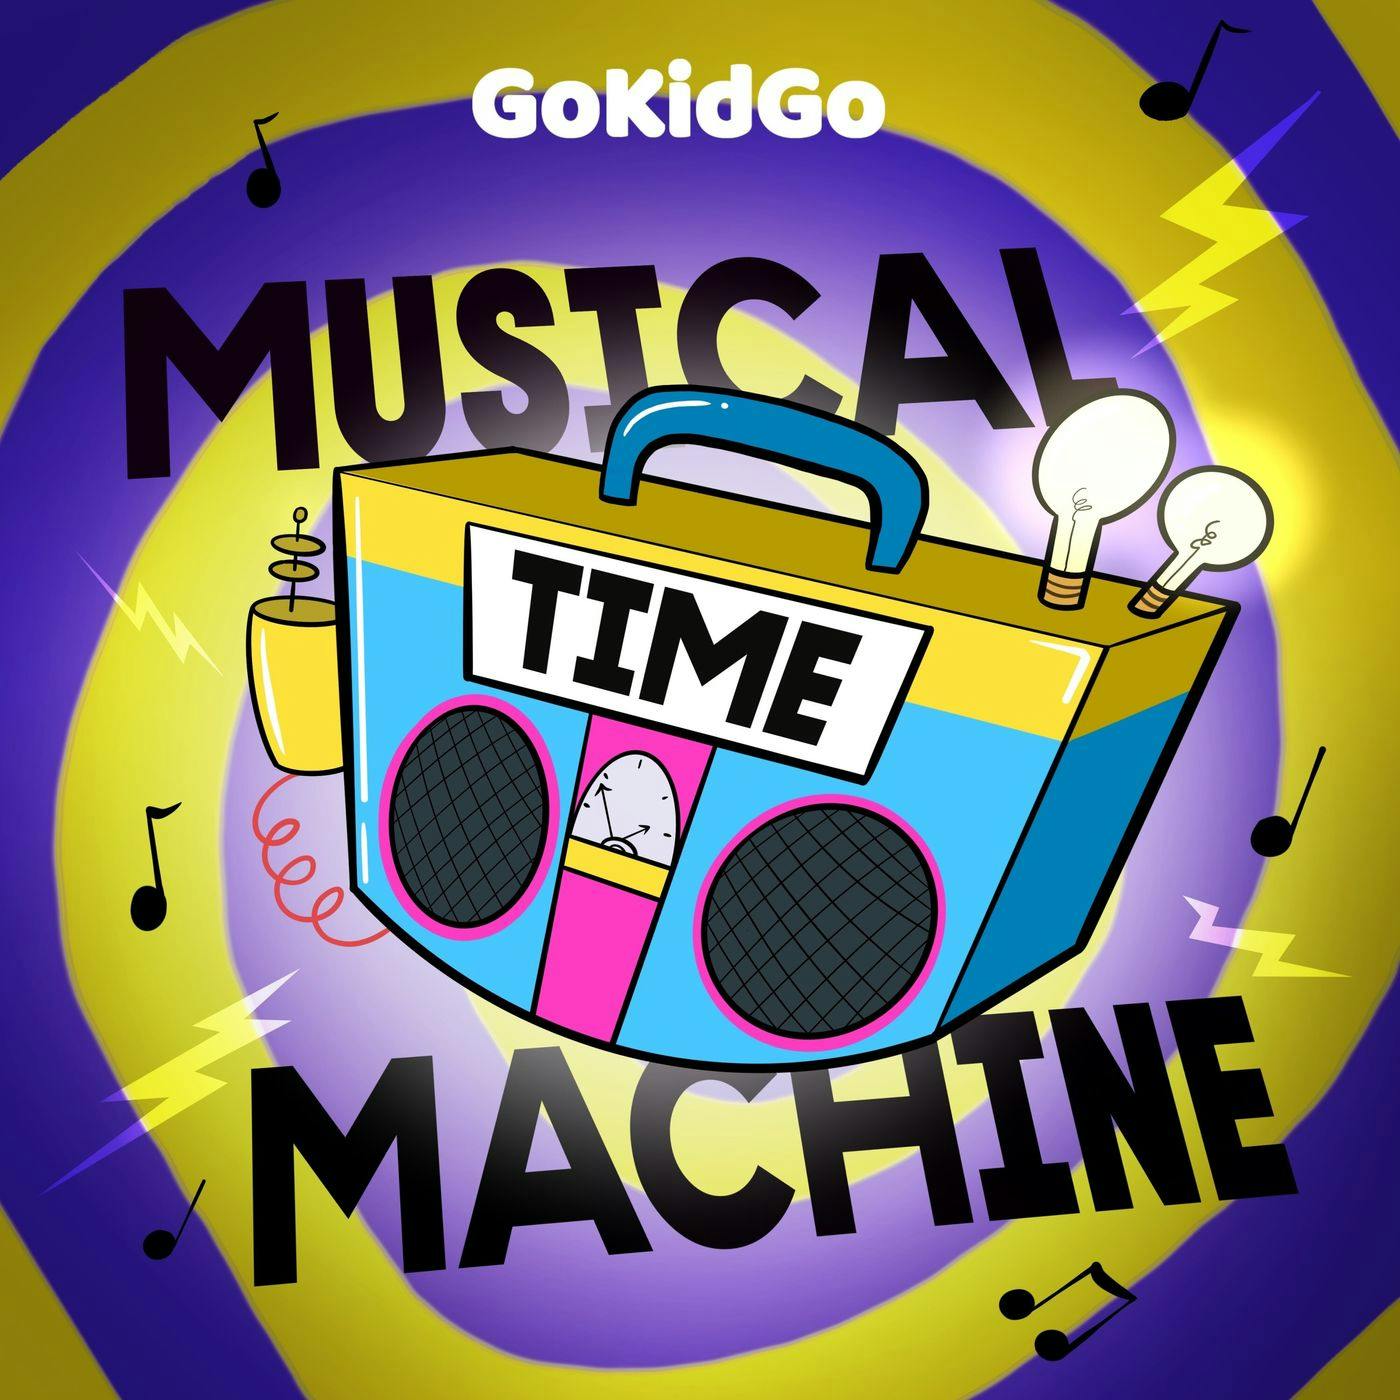 Musical Time Machine podcast show image